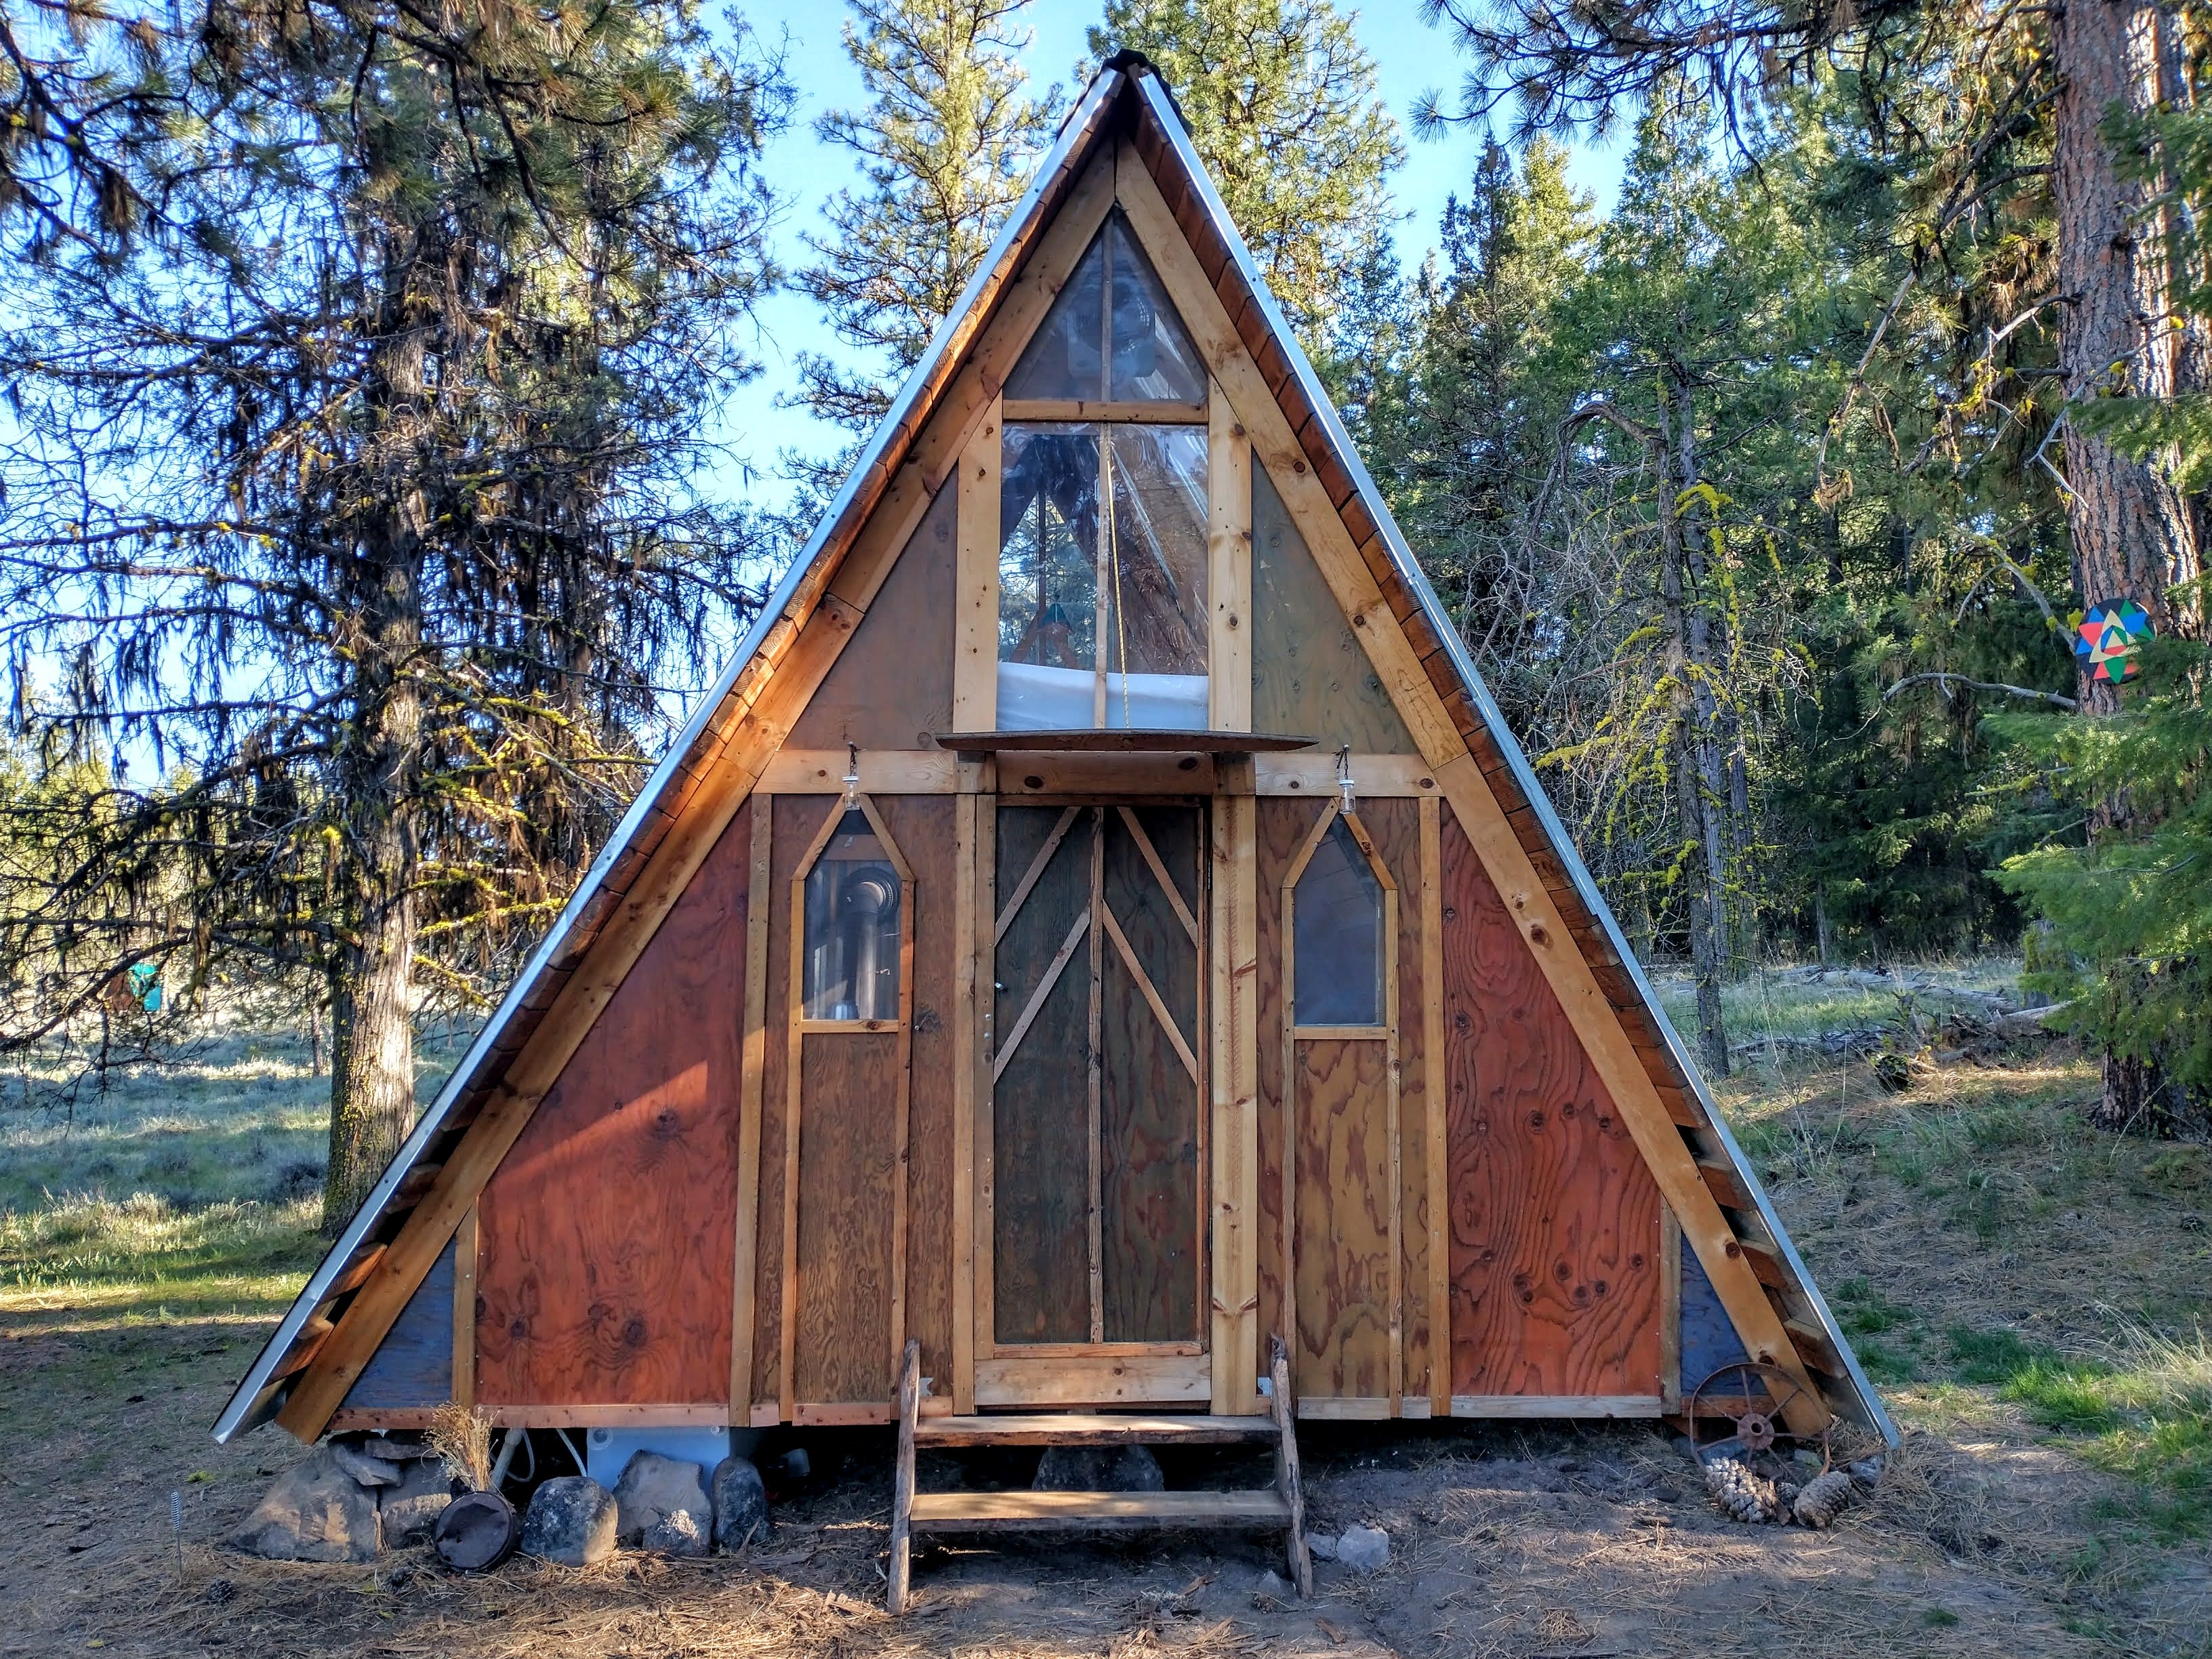 The Snug Shack, built from many reused and hand-milled wood materials. 